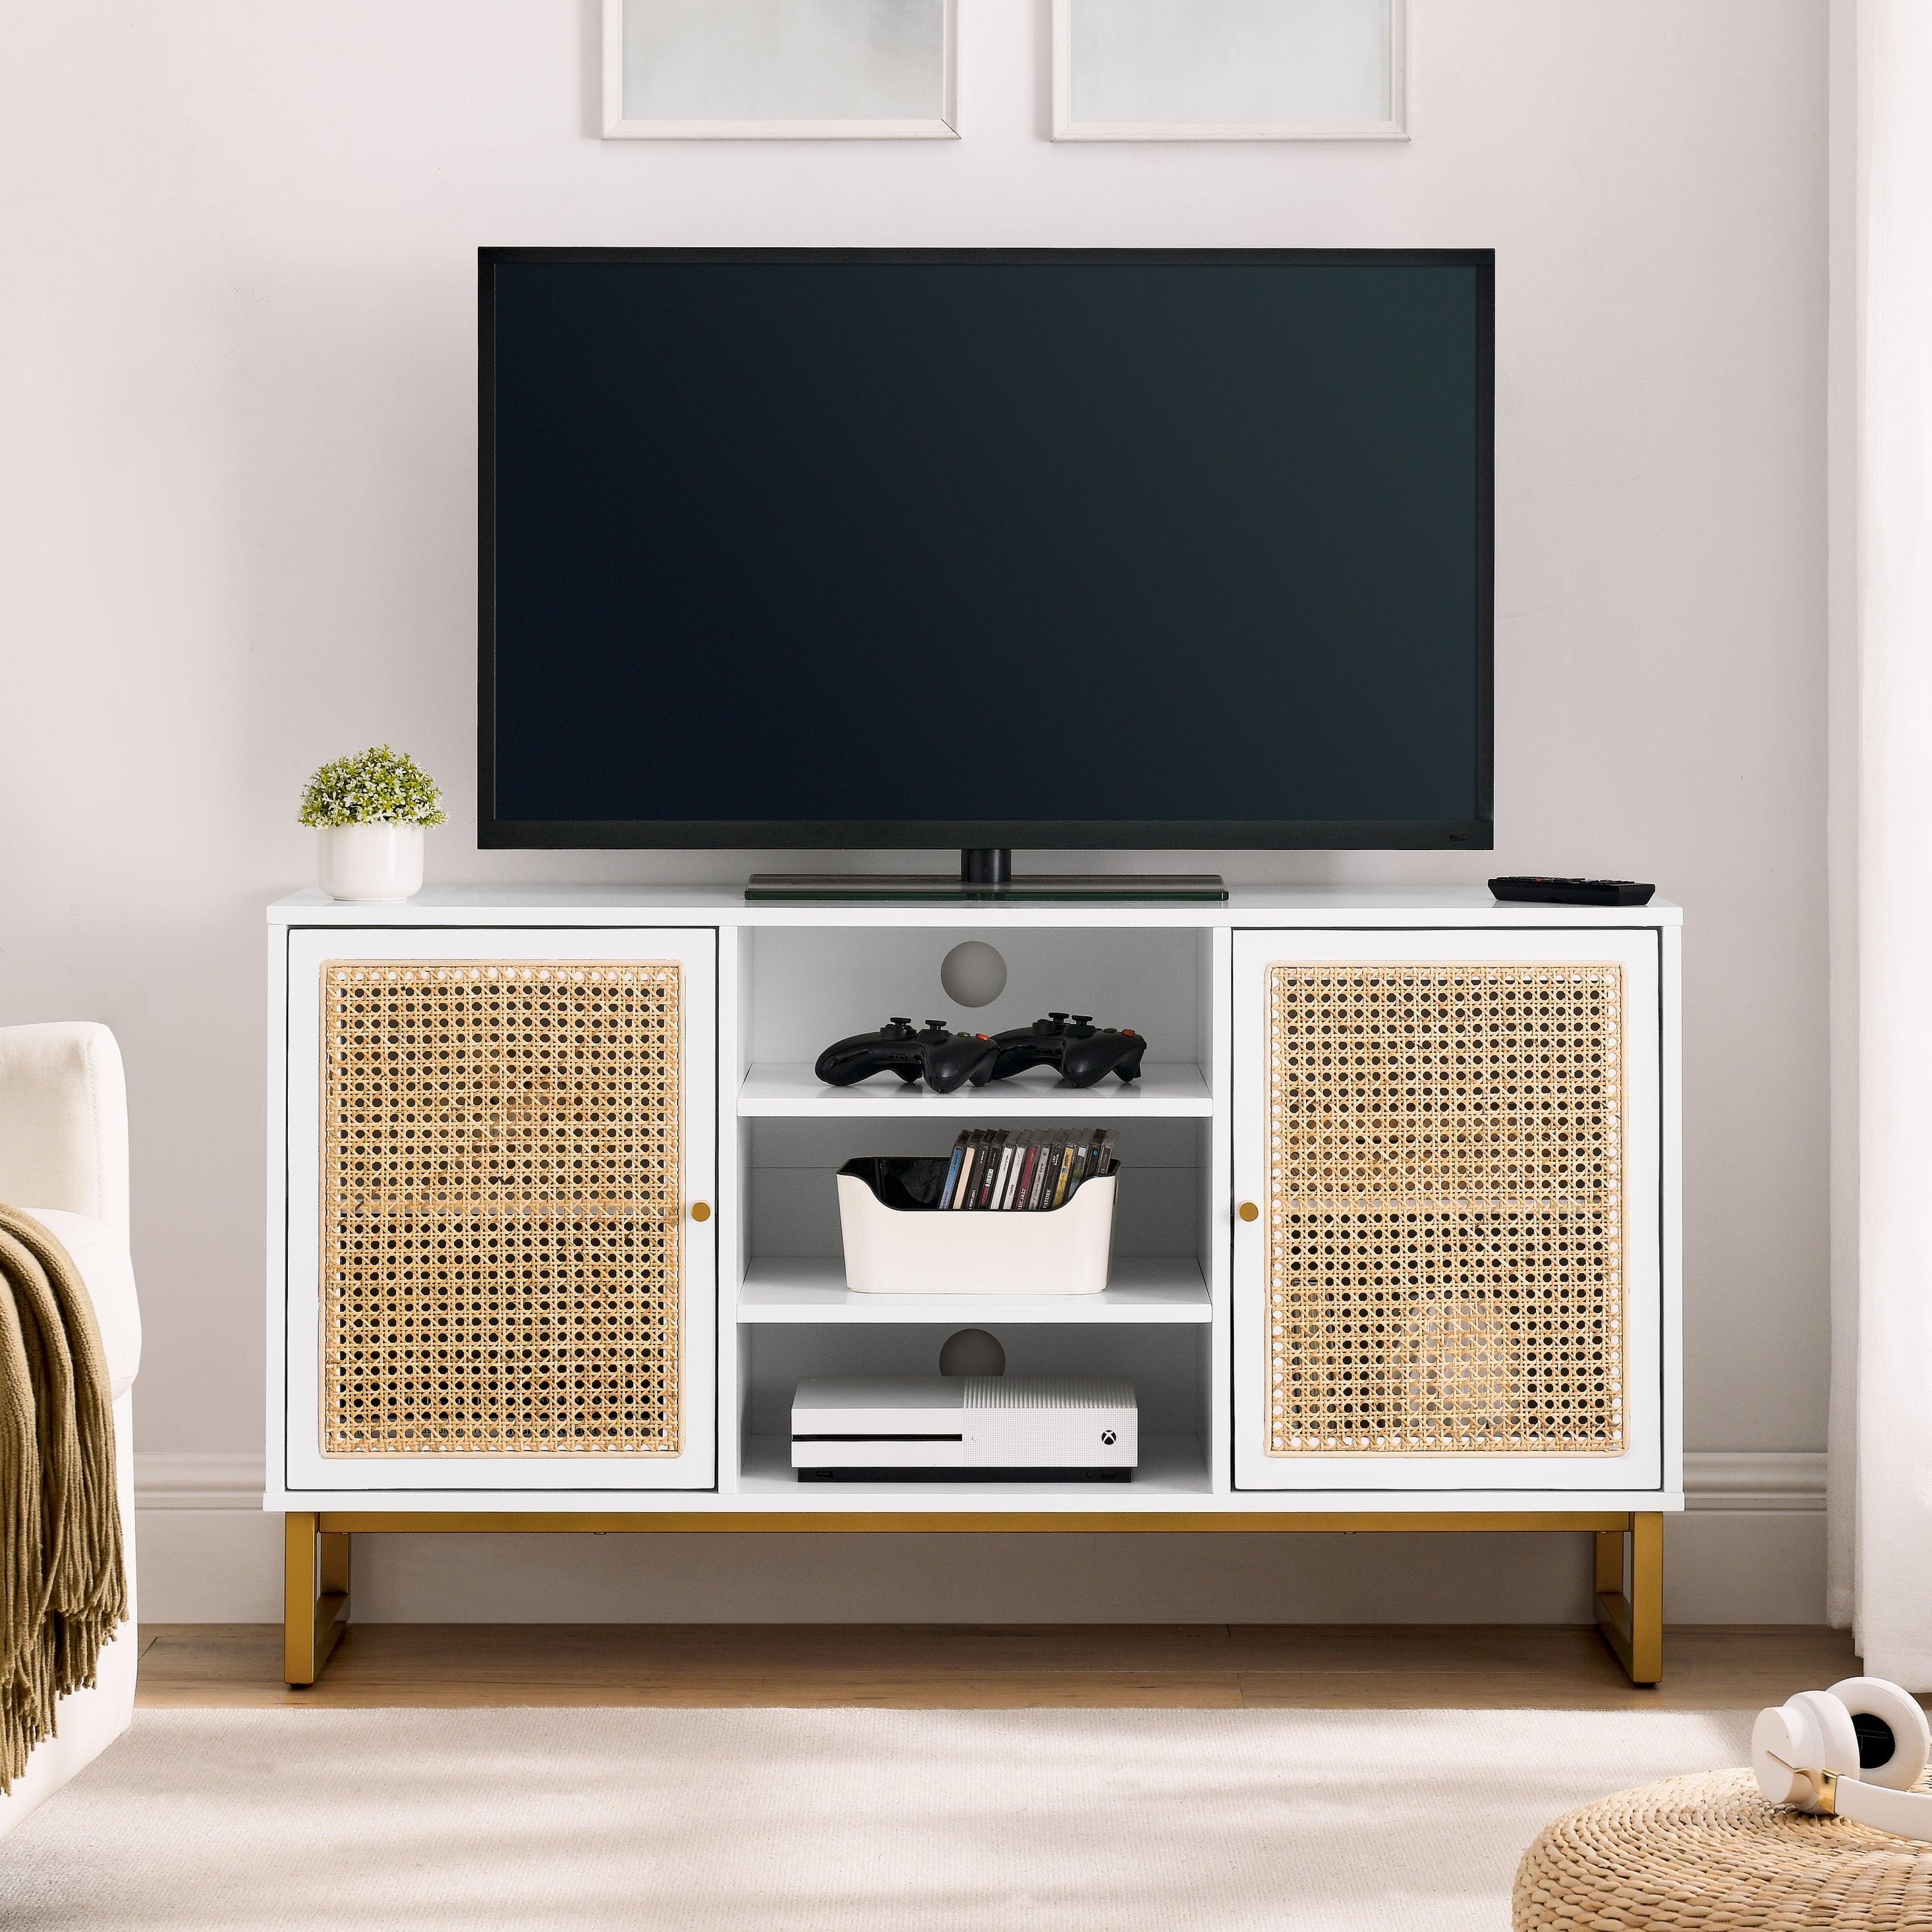 47 Inch Mid Century Modern White TV Stand with Adjustable Shelf, Rattan TV Stands, Entertainment Cabinet, Media Console for Living Room Bedroom Media Room, White Wood Finish & Metal Legs LamCham